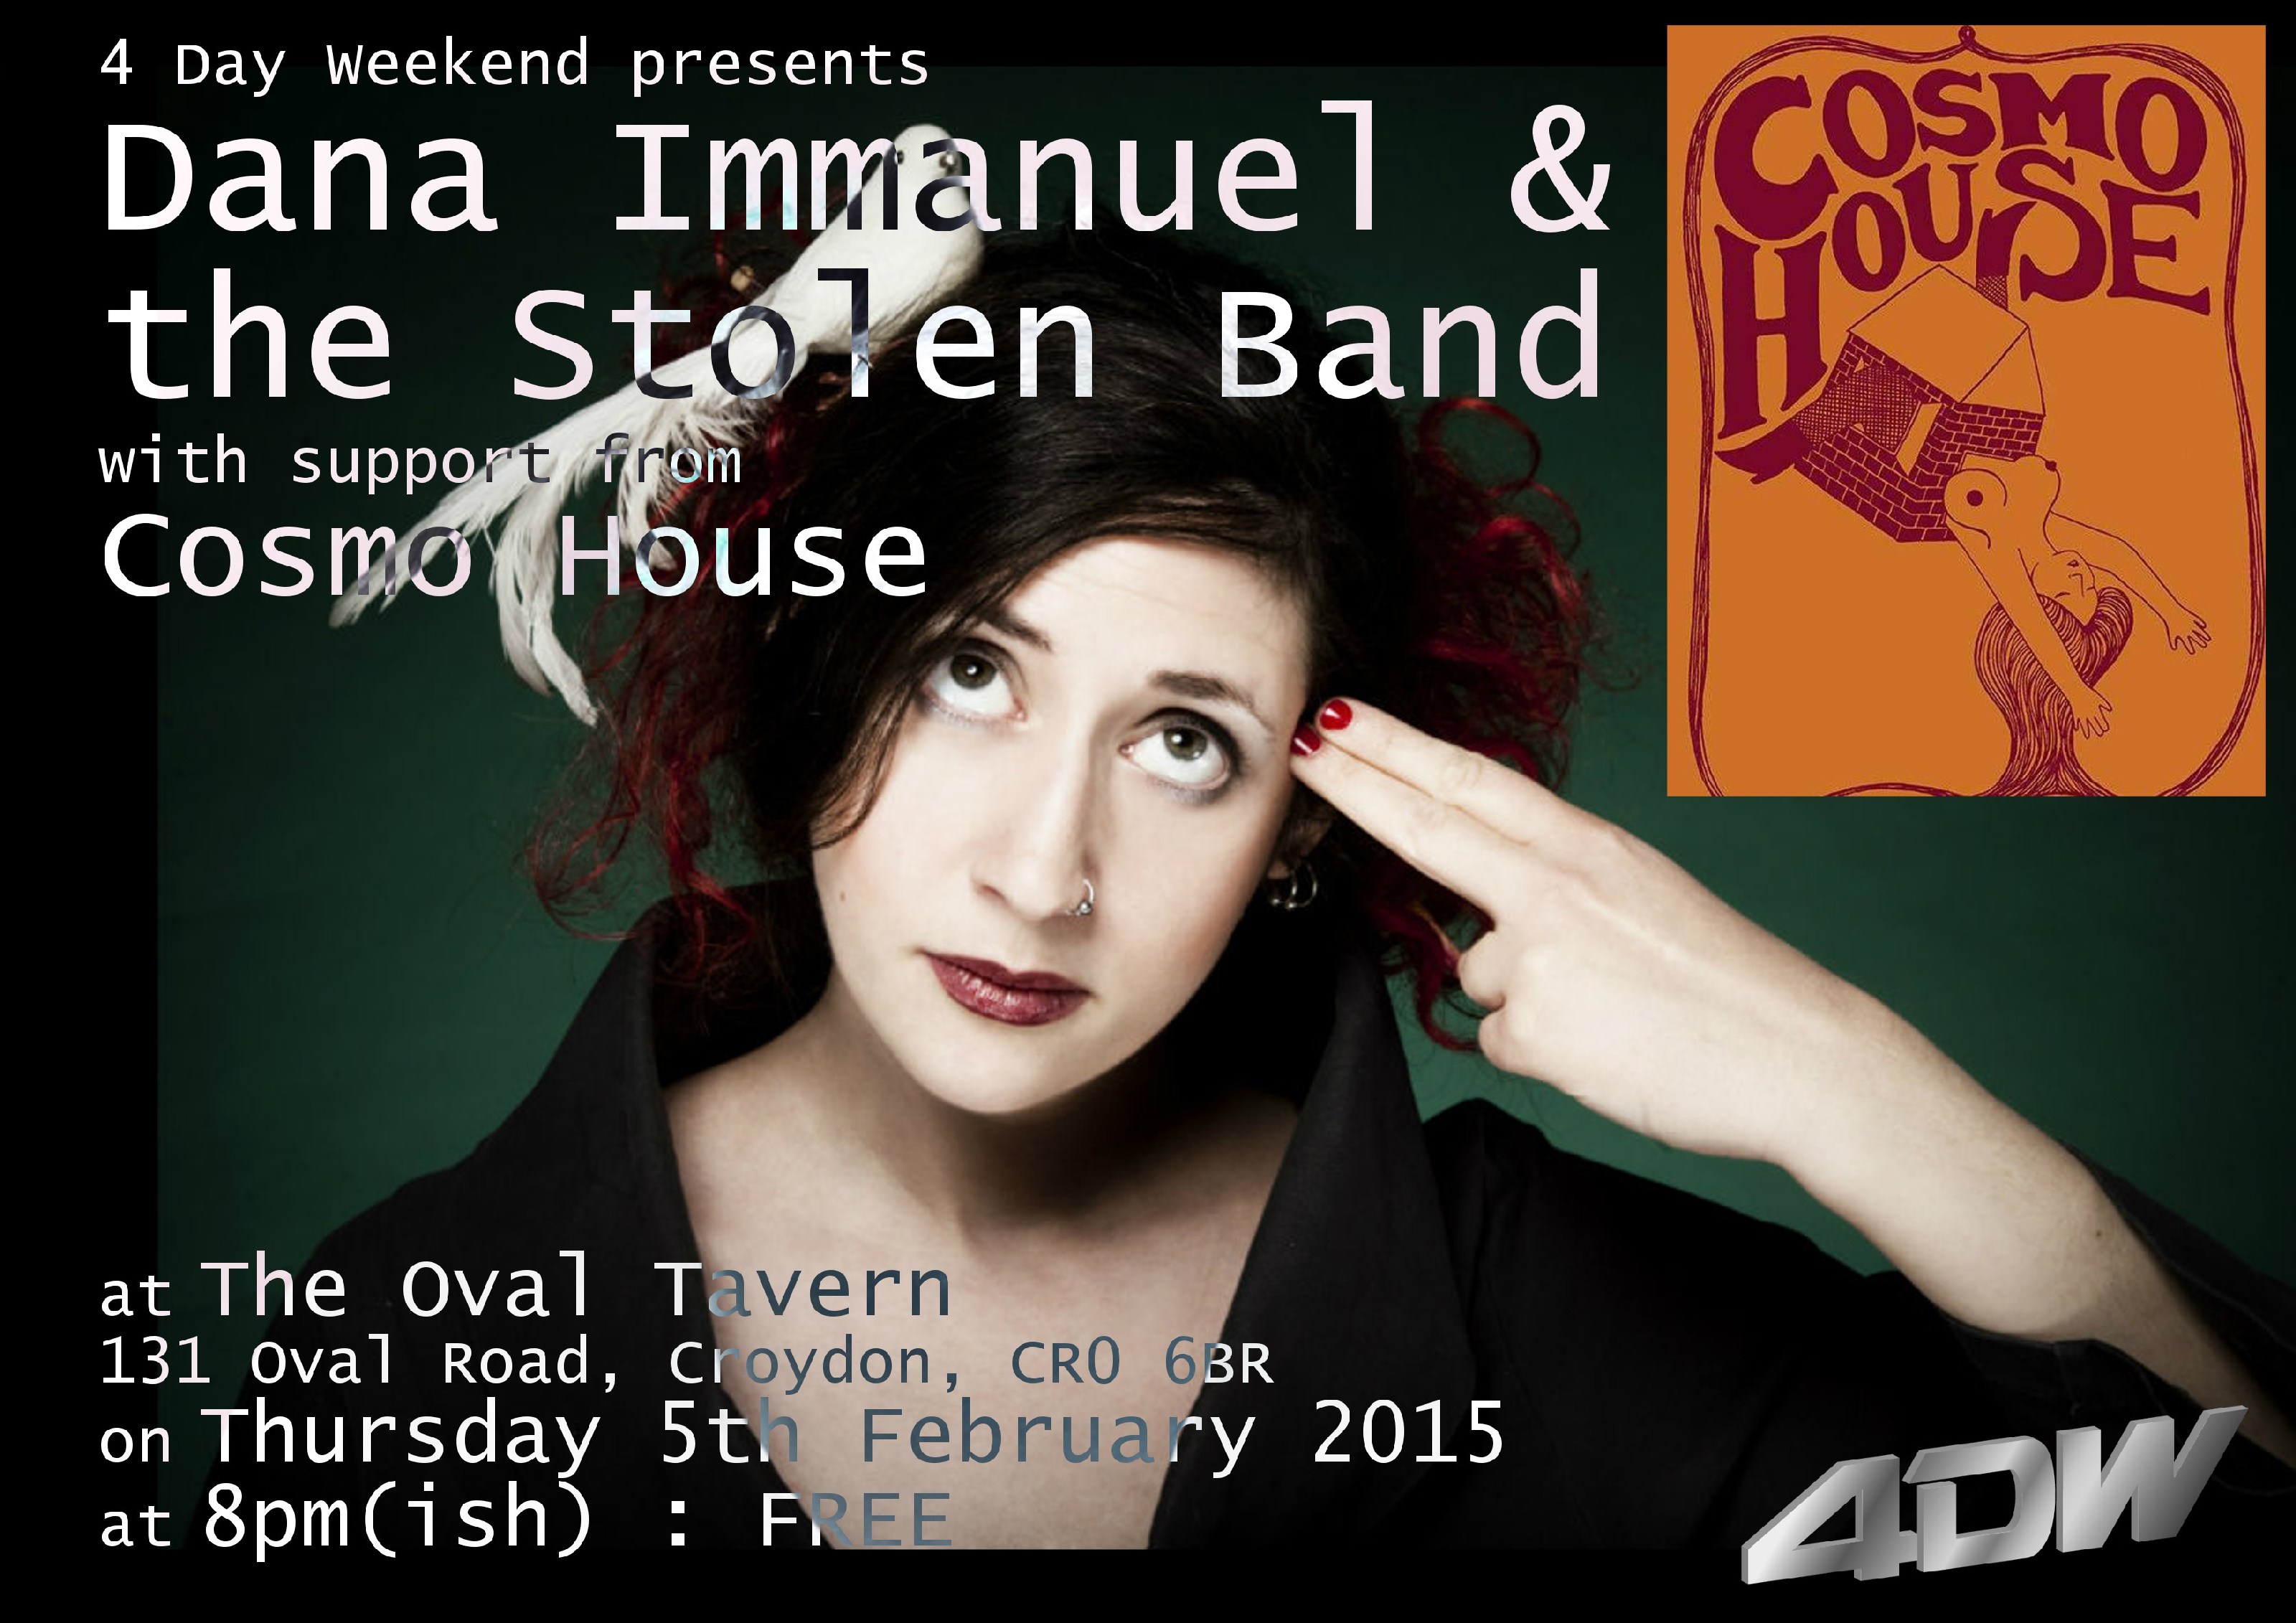 4 Day Weekend: Dana Immanuel & The Stolen Band + Cosmo House